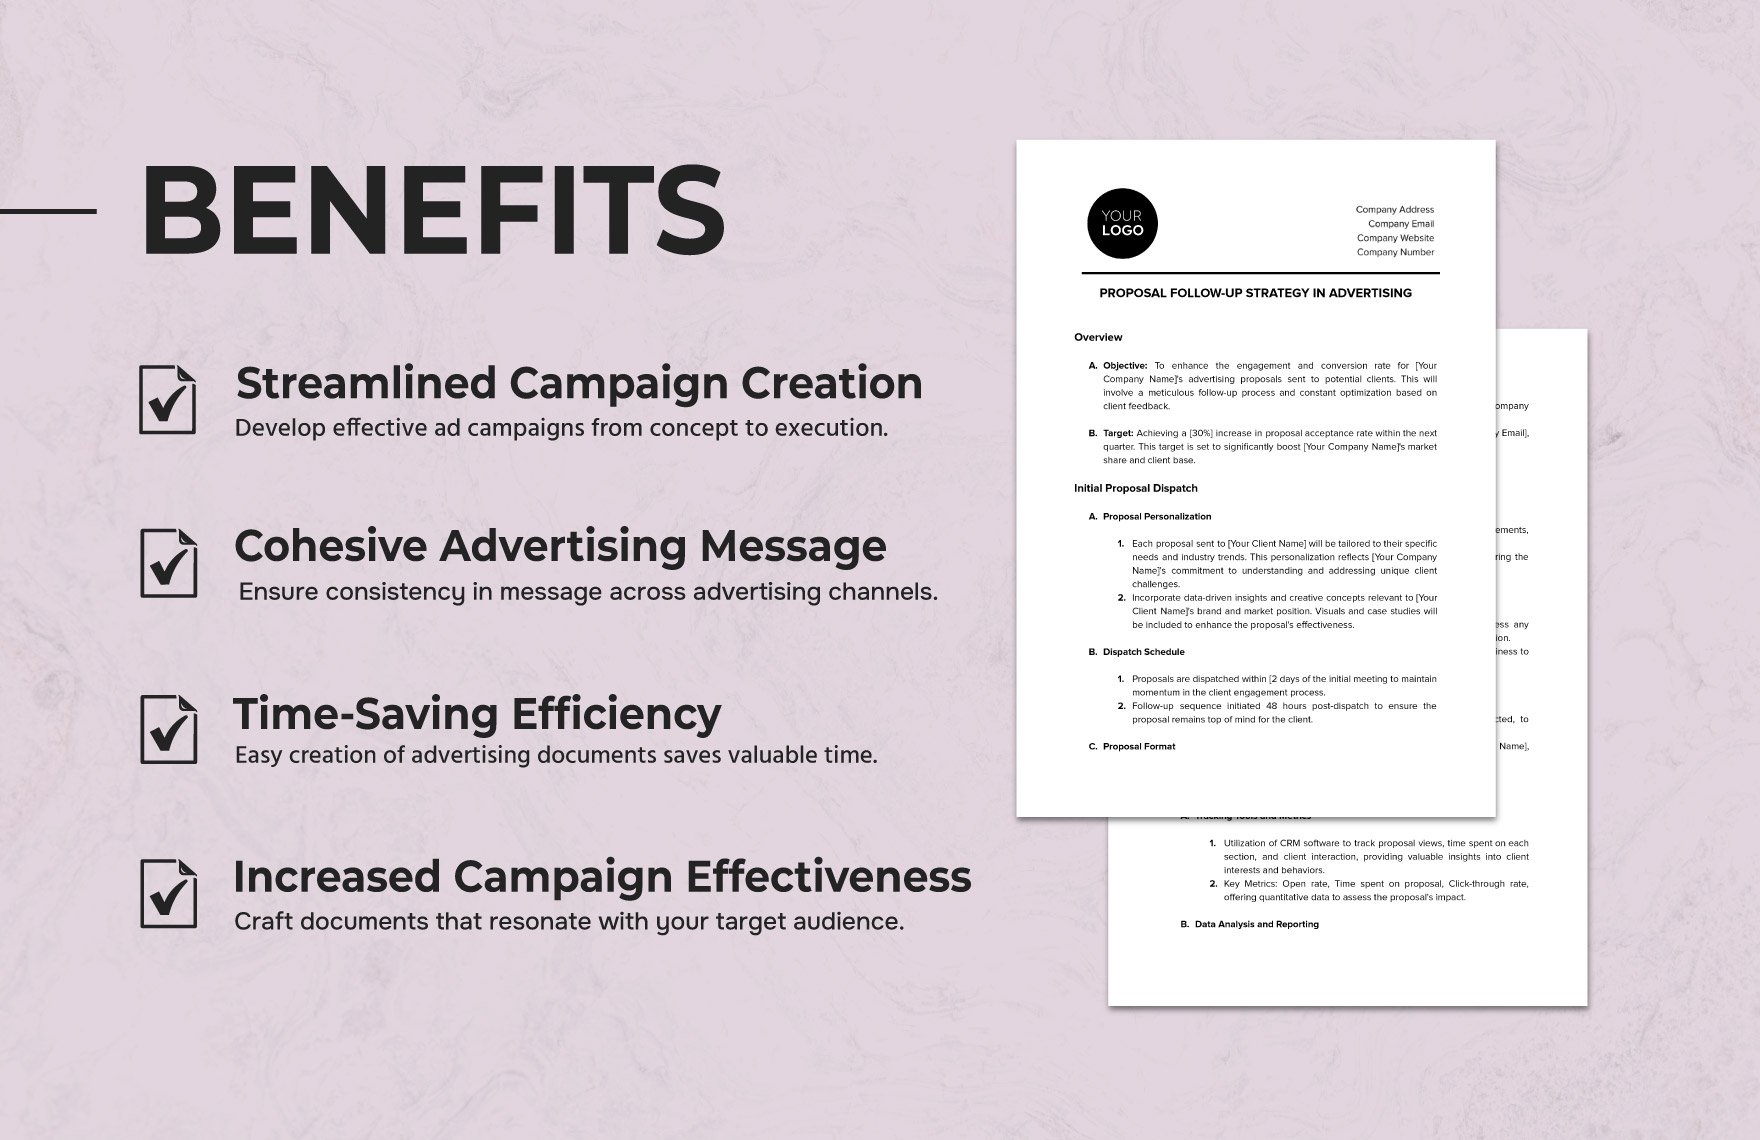 Proposal Follow-Up Strategy in Advertising Template